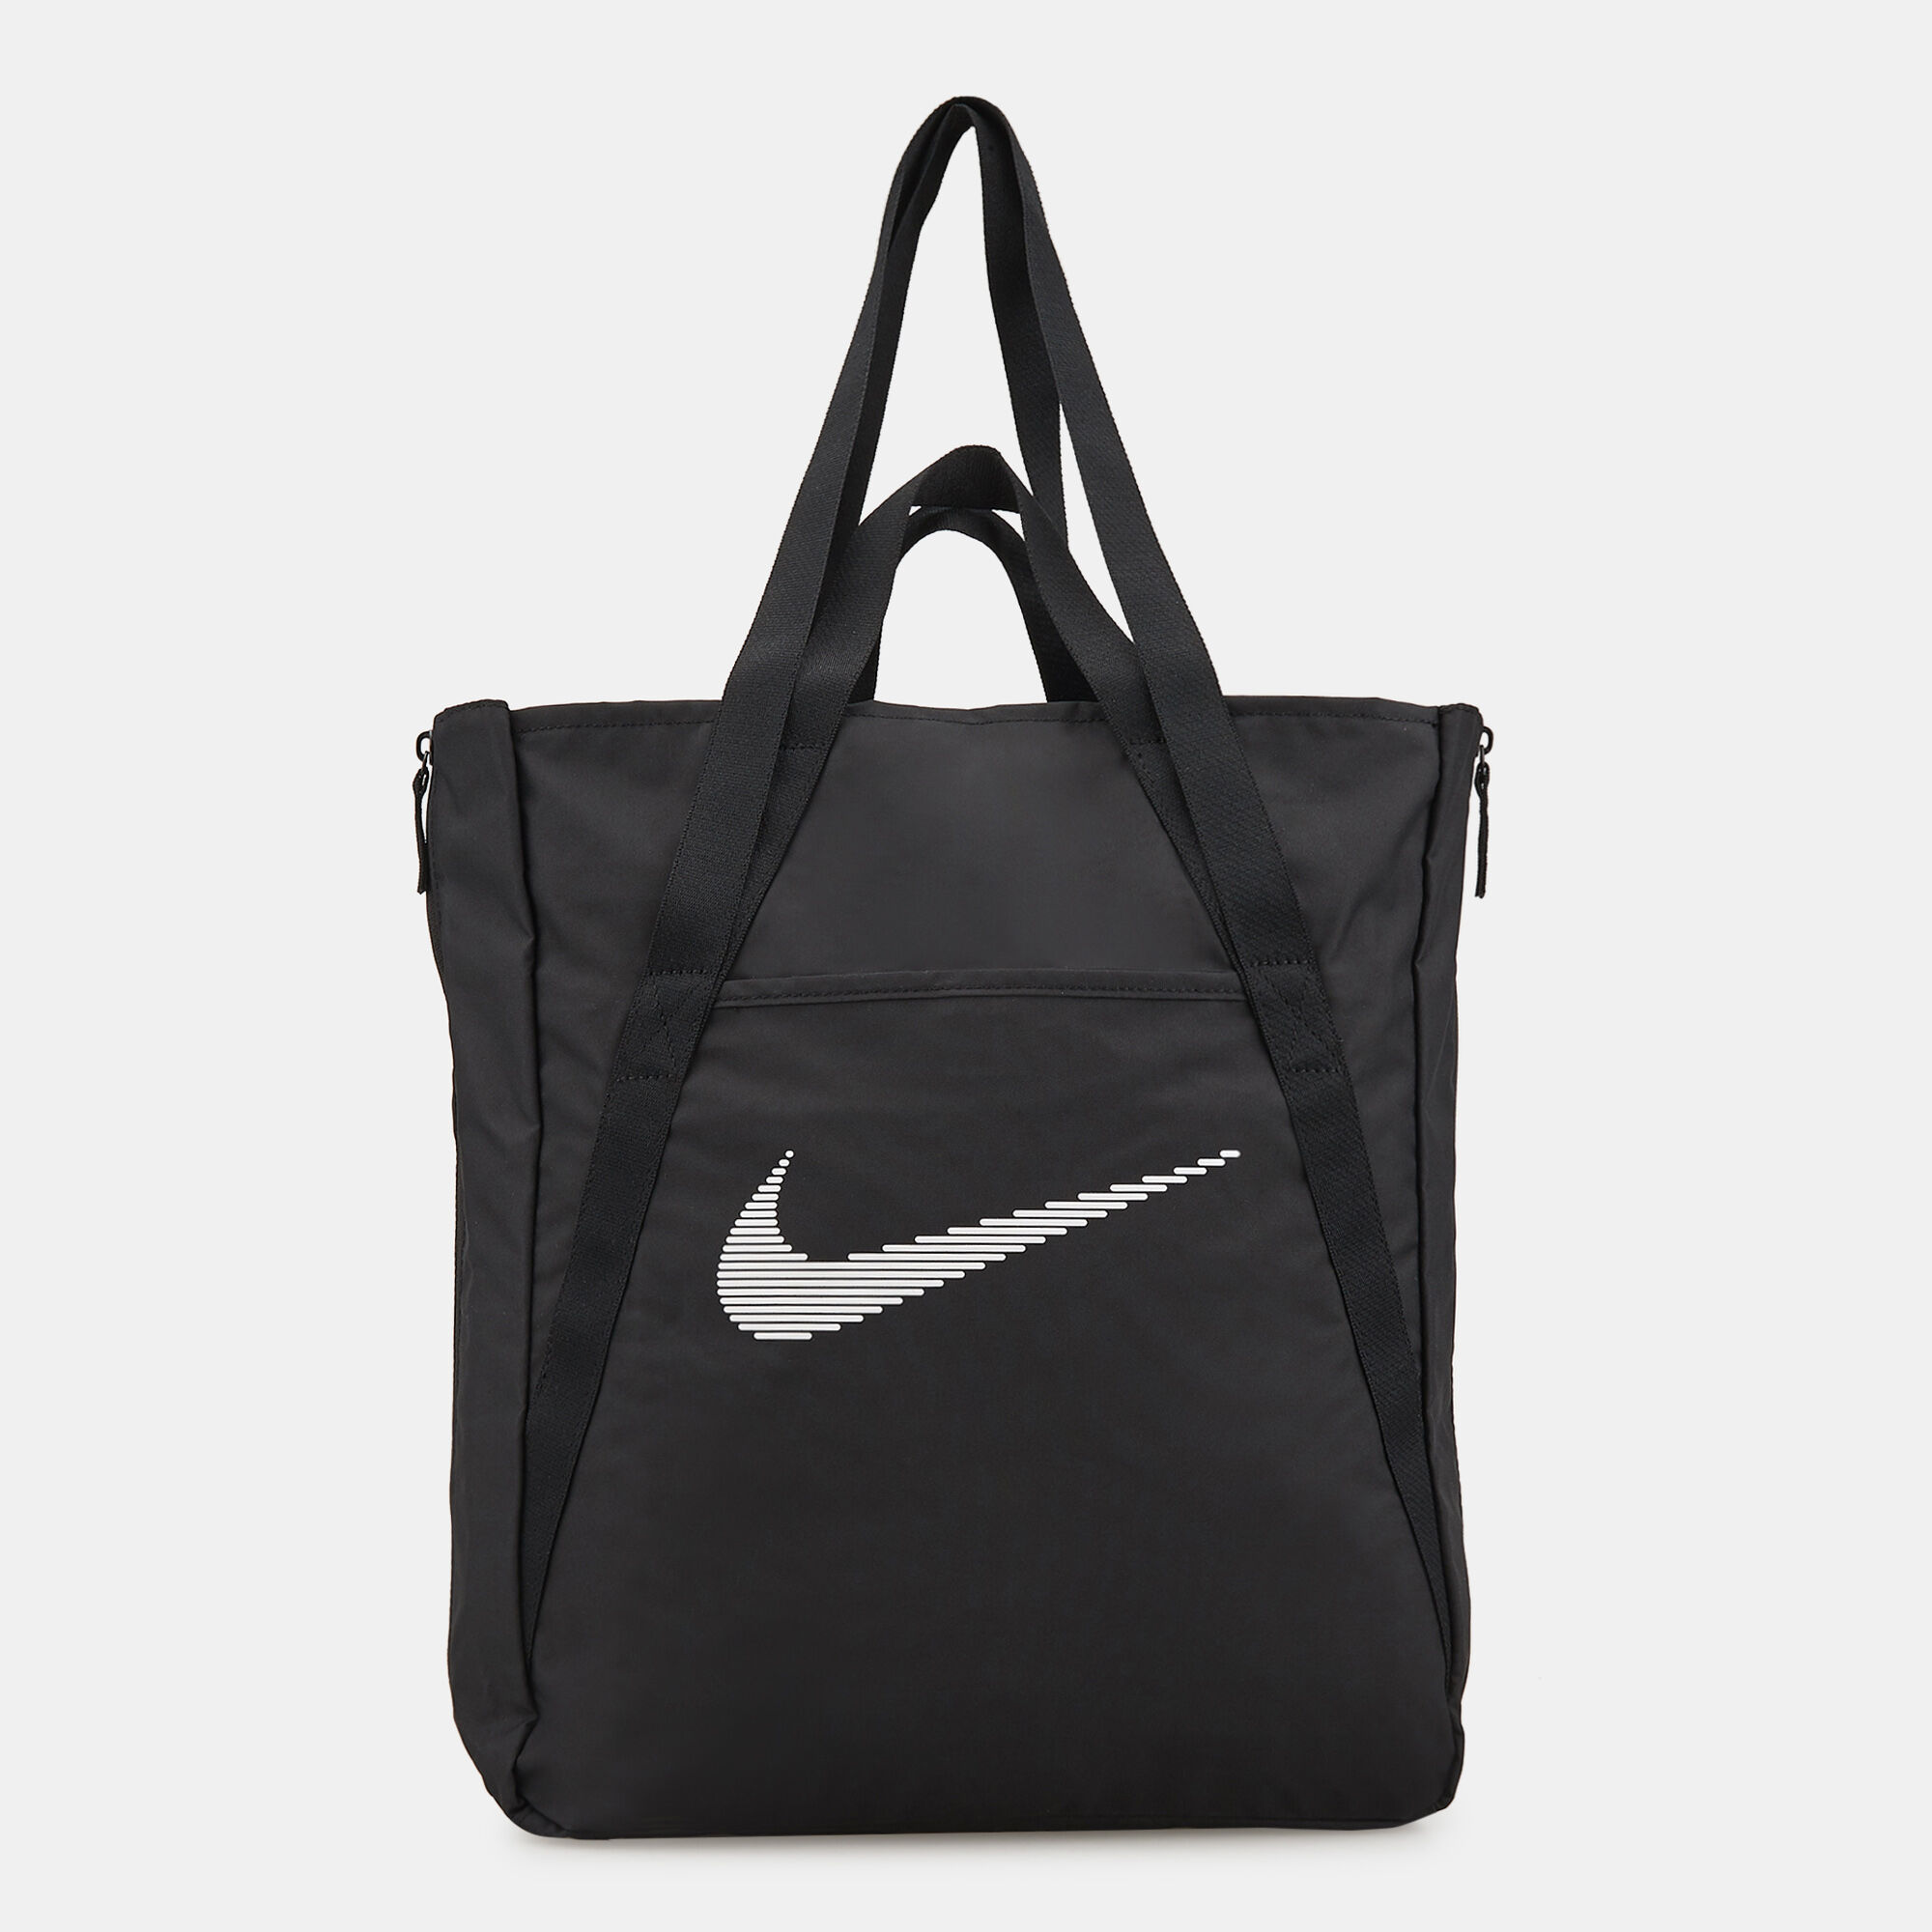 Nike 3 Piece Combo Travel Bag » Buy online from